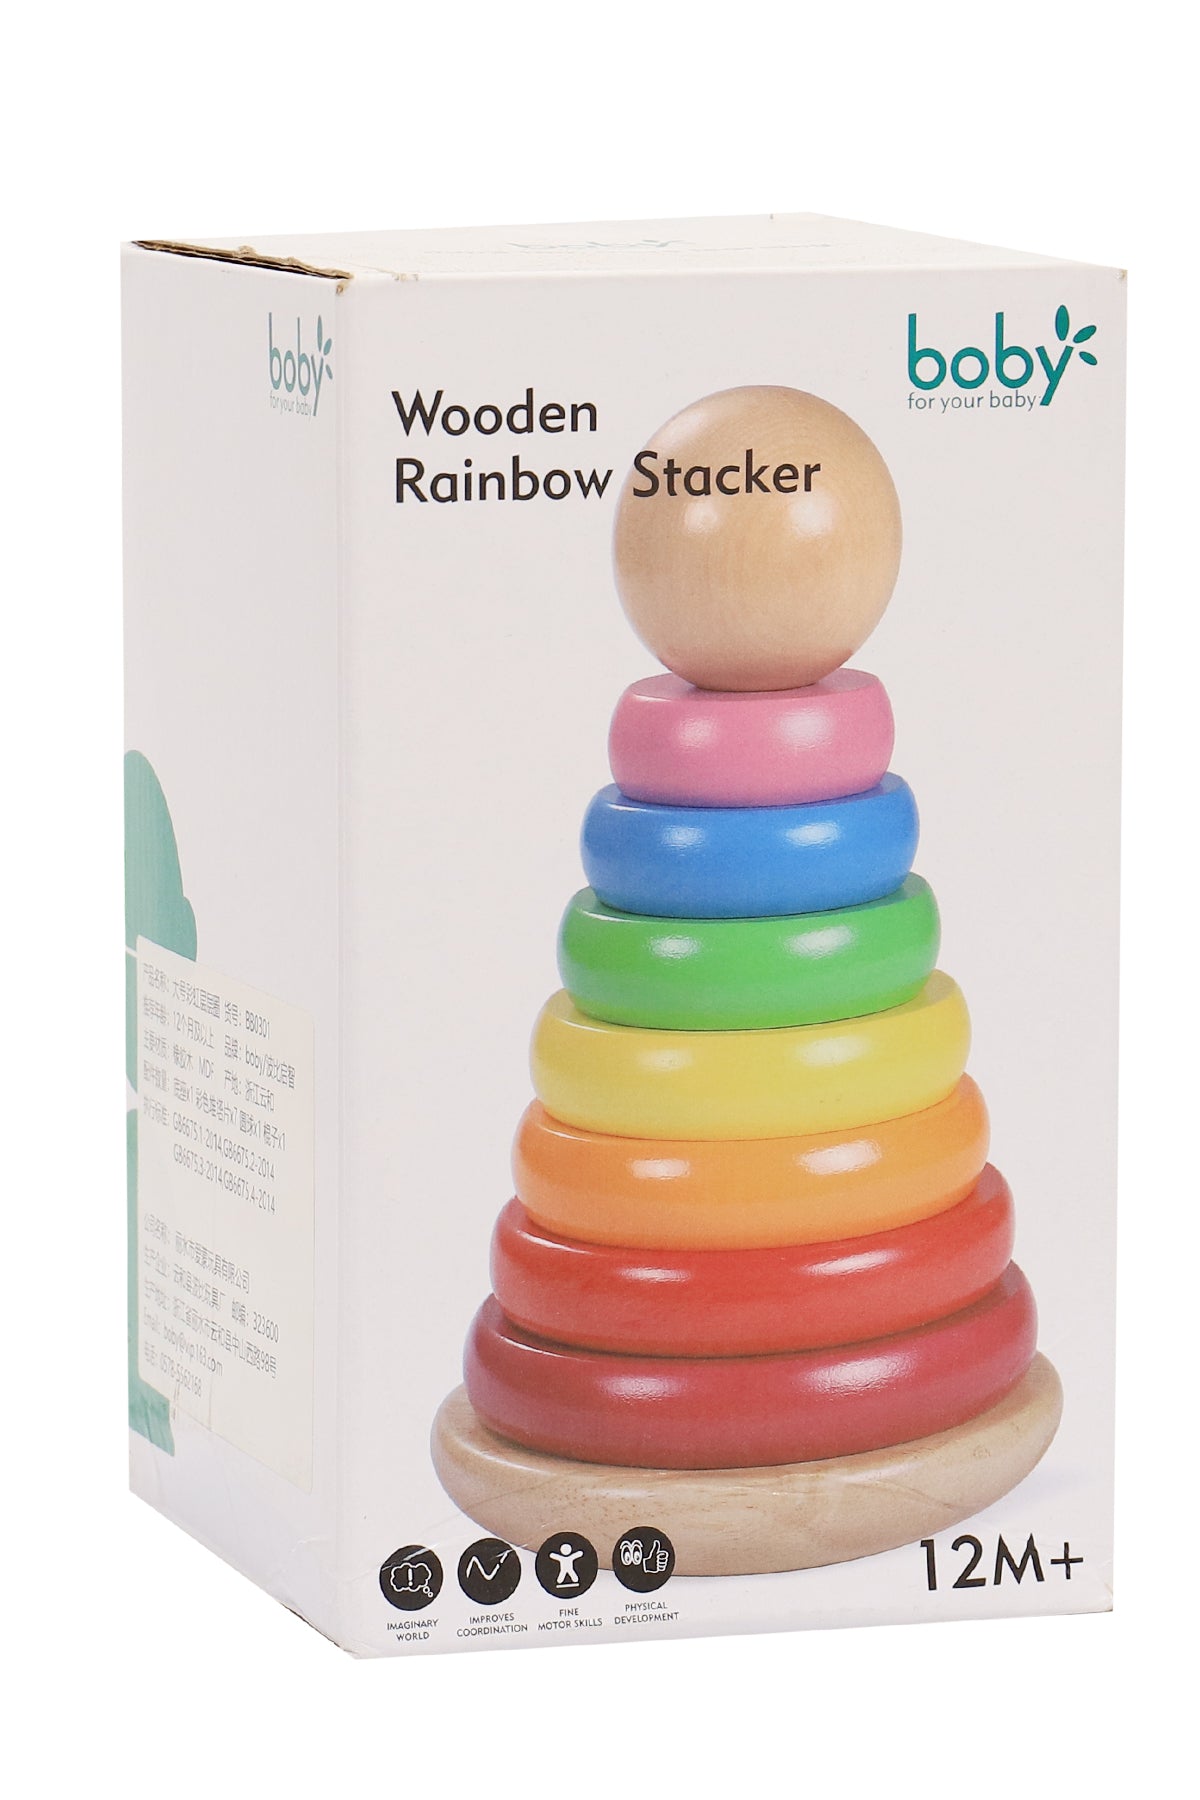 Wooden Rainbow Stacker Play Set for Kids